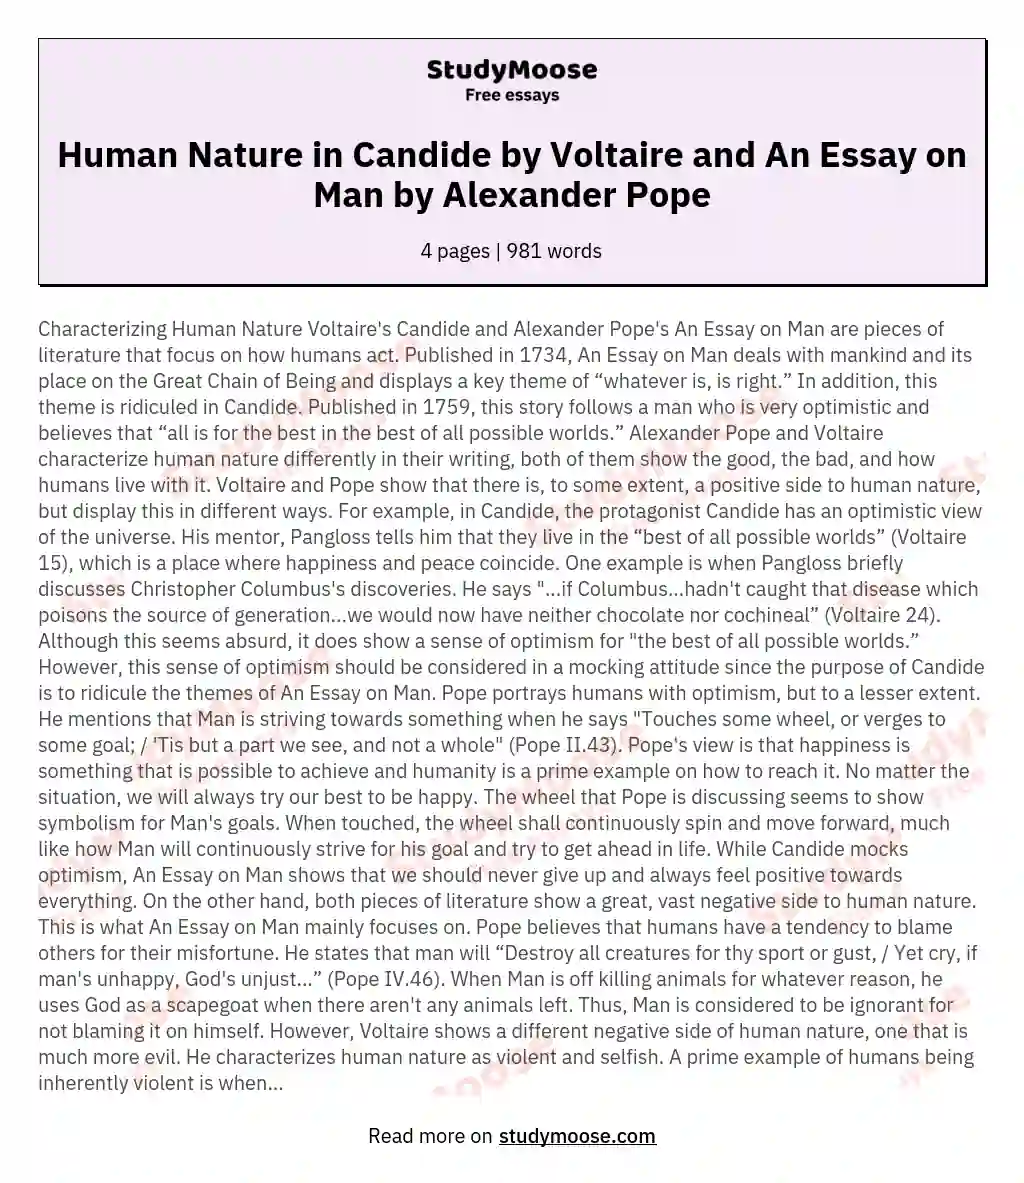 Human Nature in Candide by Voltaire and An Essay on Man by Alexander Pope essay